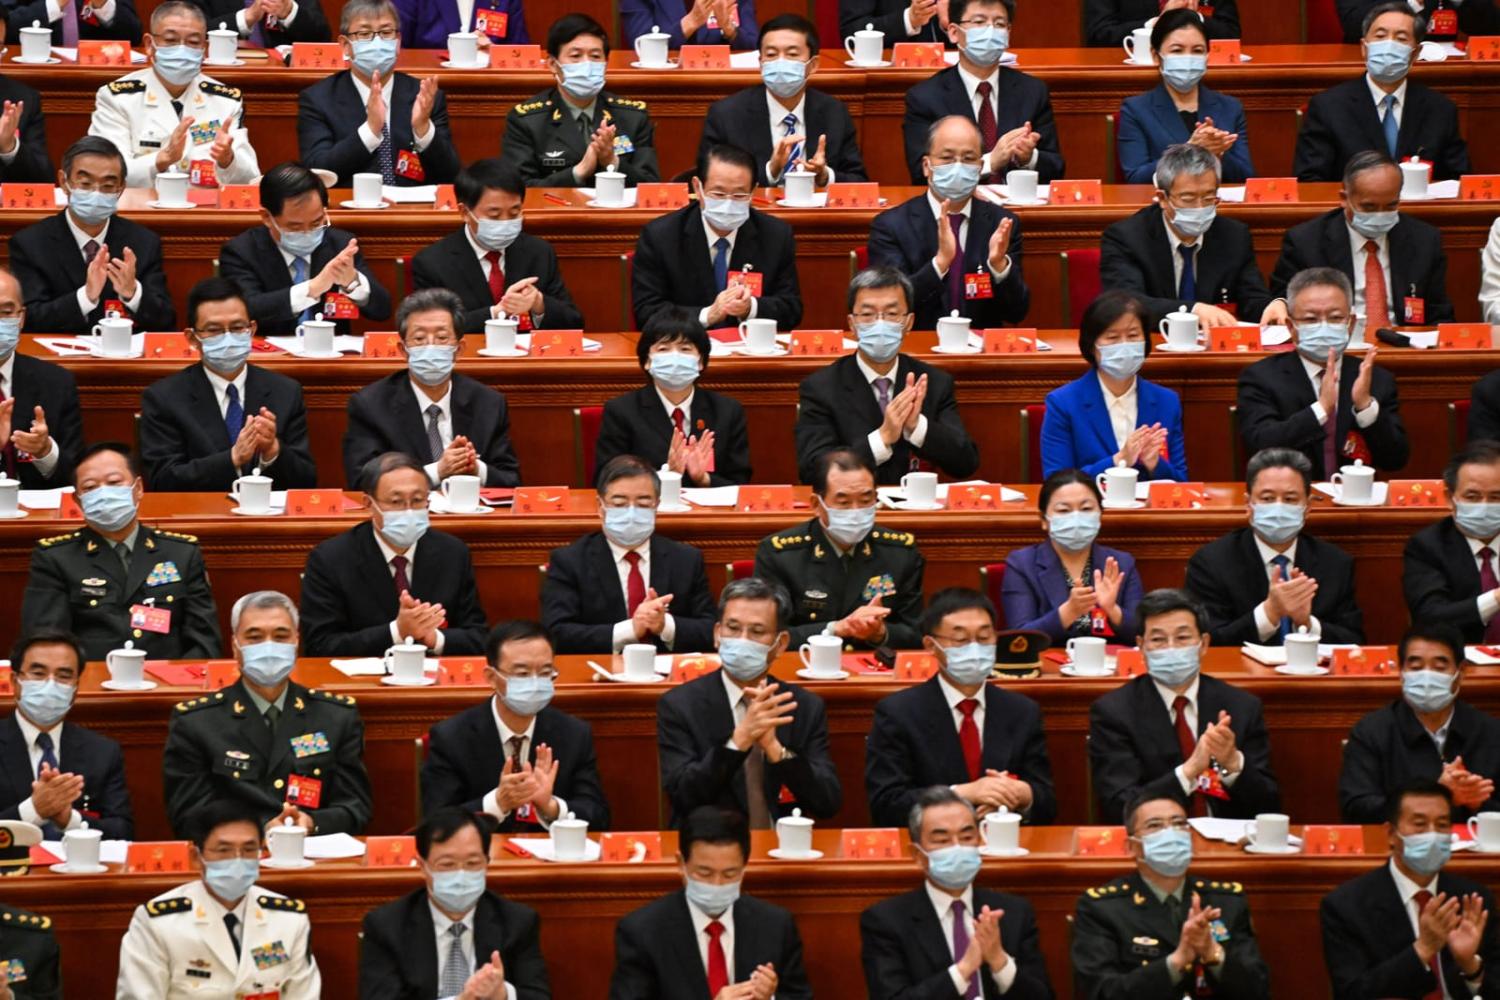 Other east Asian systems also have fewer women in their ranks than many Western countries, but none are as bad as China (Noel Celis/AFP via Getty Images)